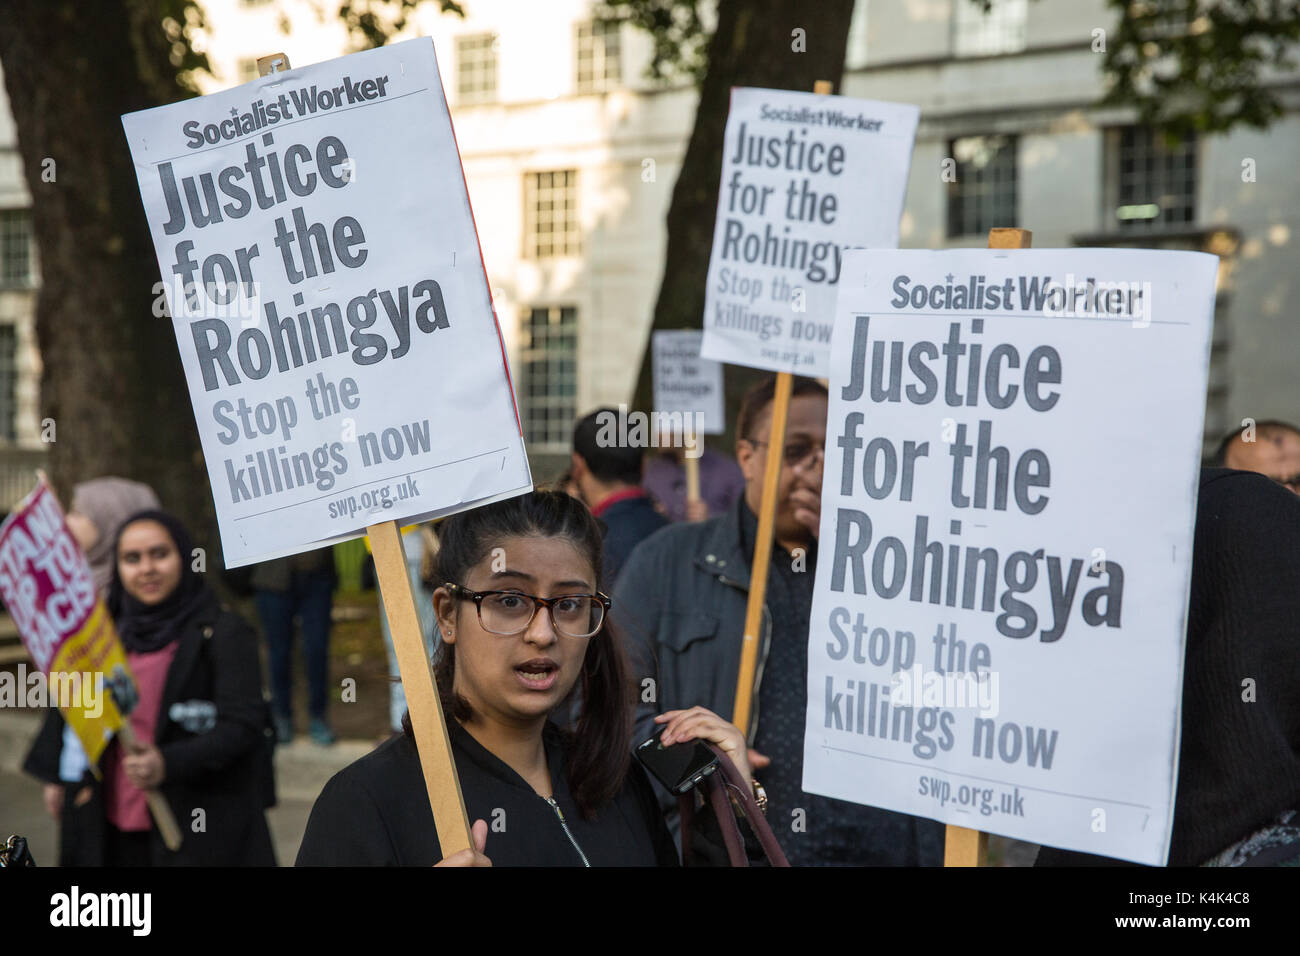 London, UK. 6th Sep, 2017. Protesters gather for an emergency rally opposite Downing Street intended to apply pressure on the British Government to intervene to prevent the killing of Rohingya people in Myanmar by the army and to urge Bangladesh and India to assist Rohingya refugees from Myanmar. Credit: Mark Kerrison/Alamy Live News Stock Photo